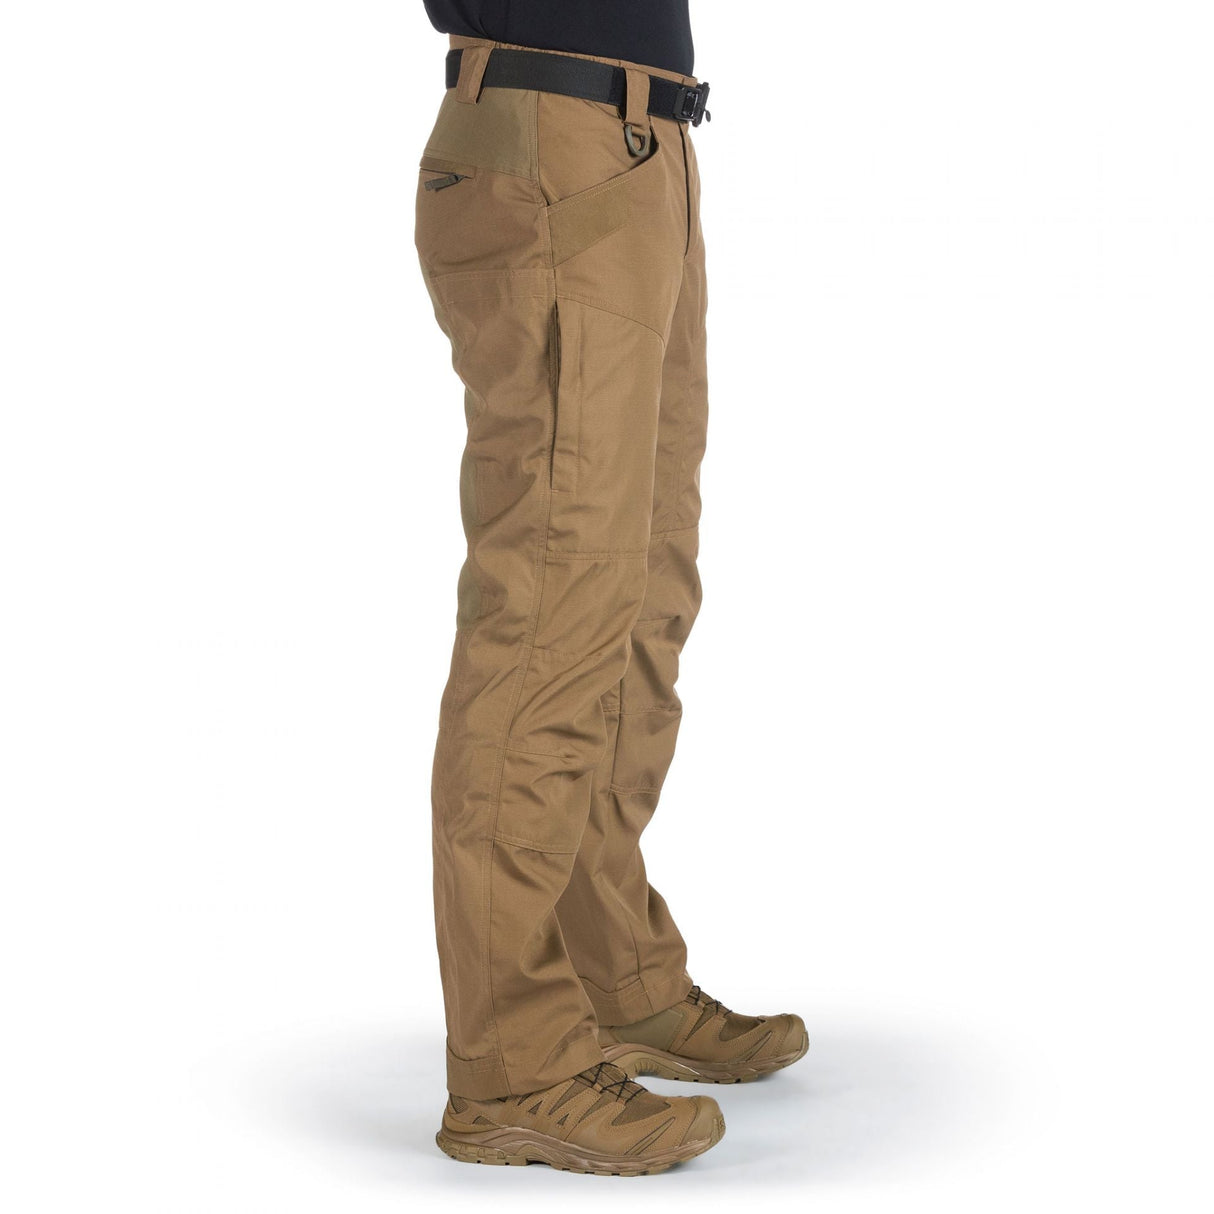 Tactical Pants: Streamlined Design for Tactical Advantage.